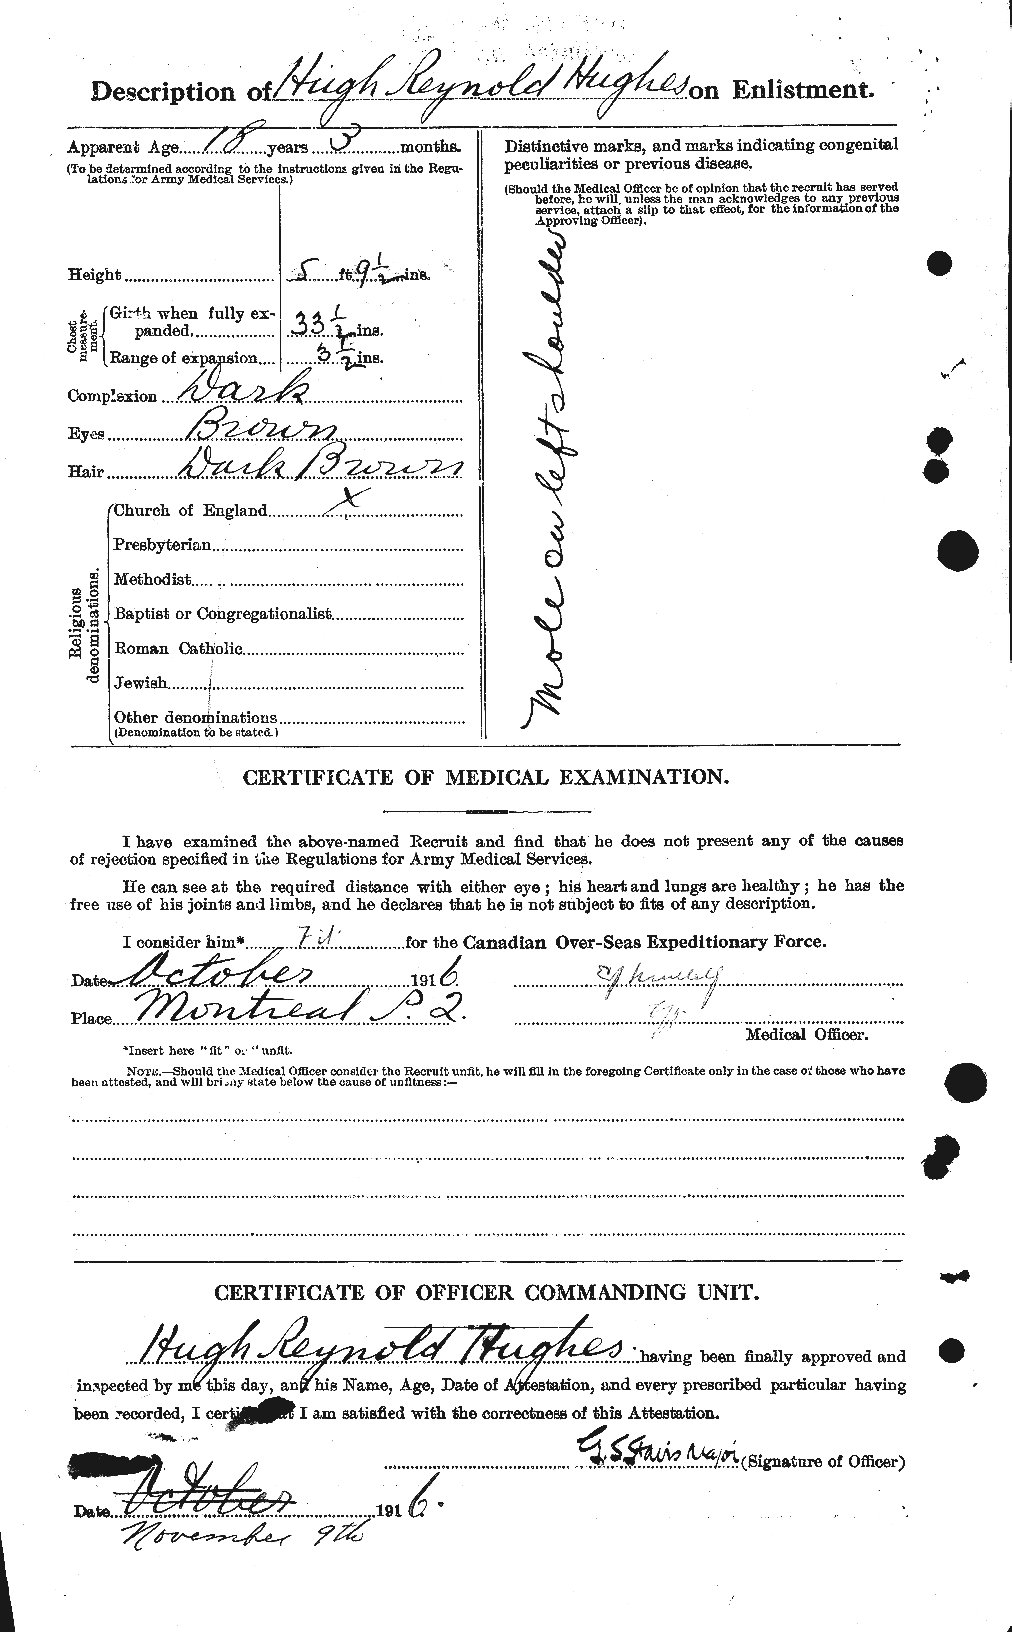 Personnel Records of the First World War - CEF 403926b